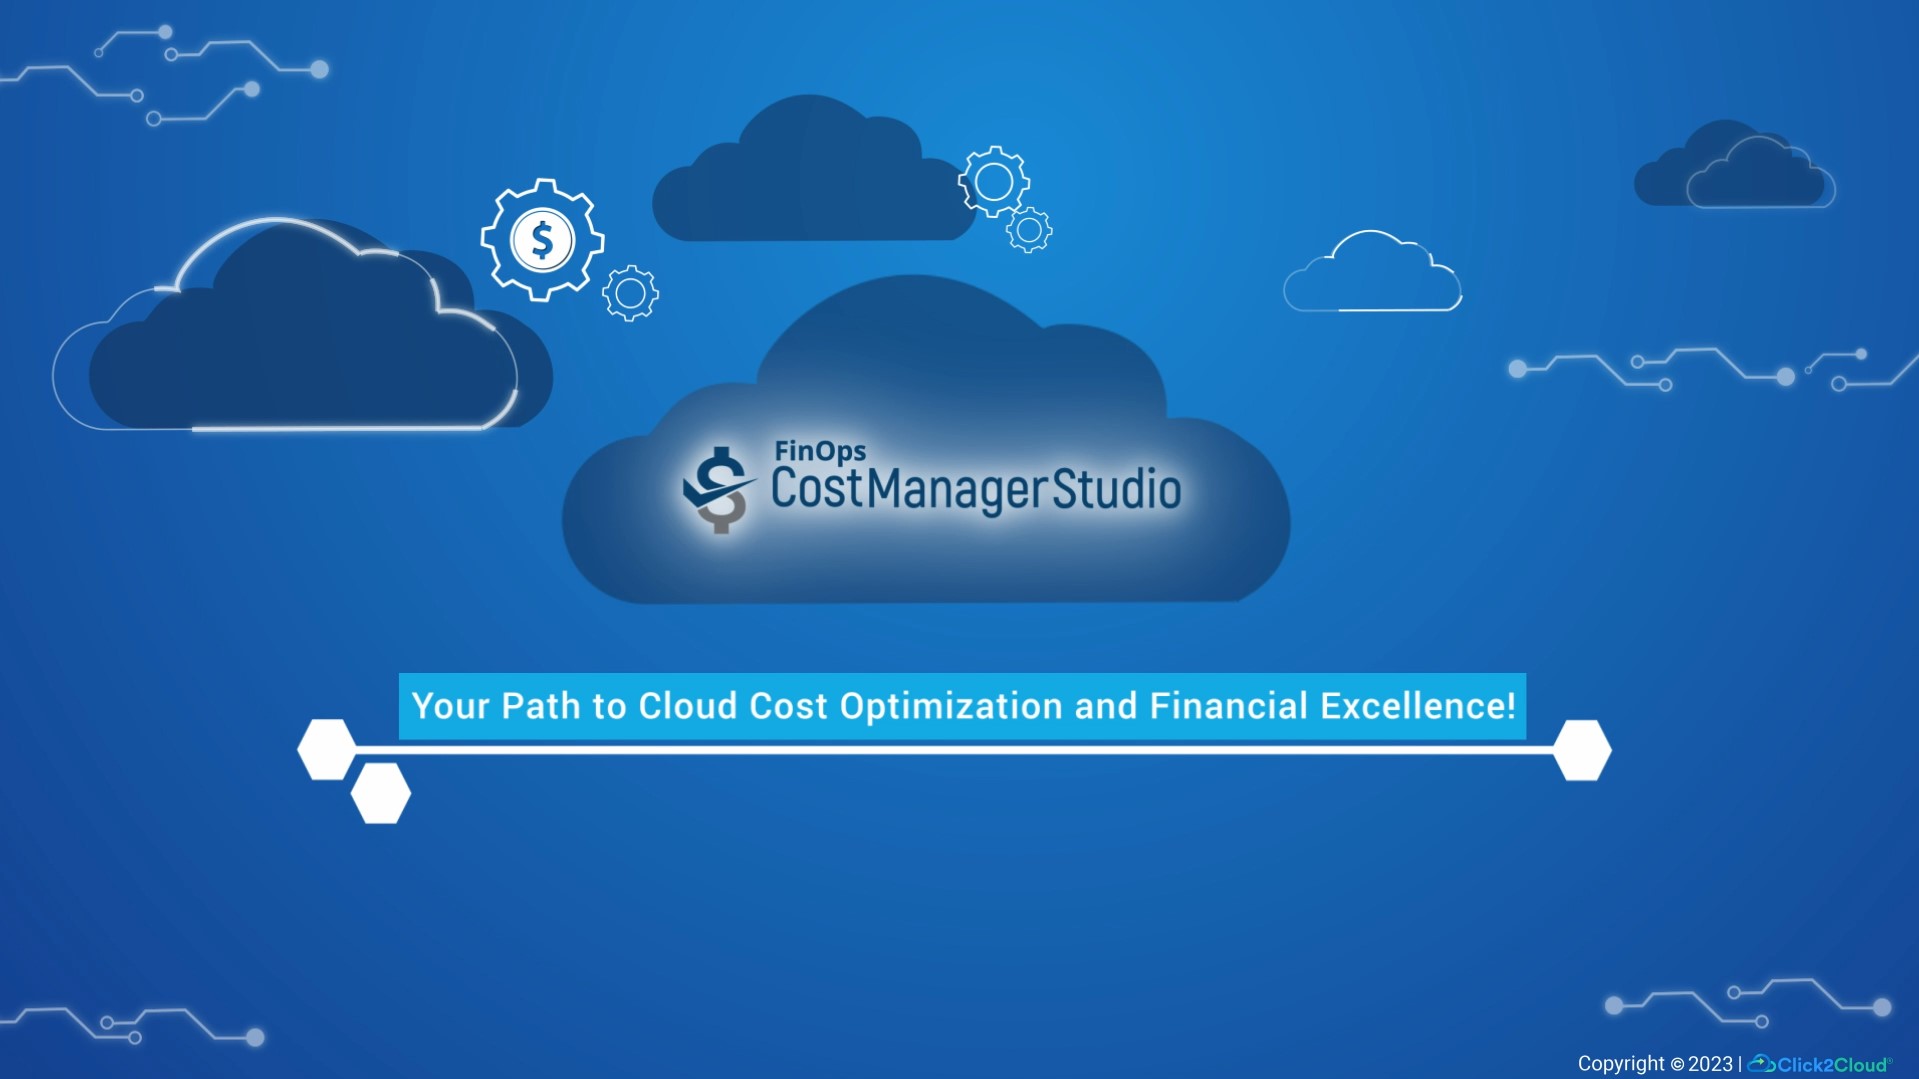 Click2cloud-Why FinOps-Cost Manager Studio?_Video